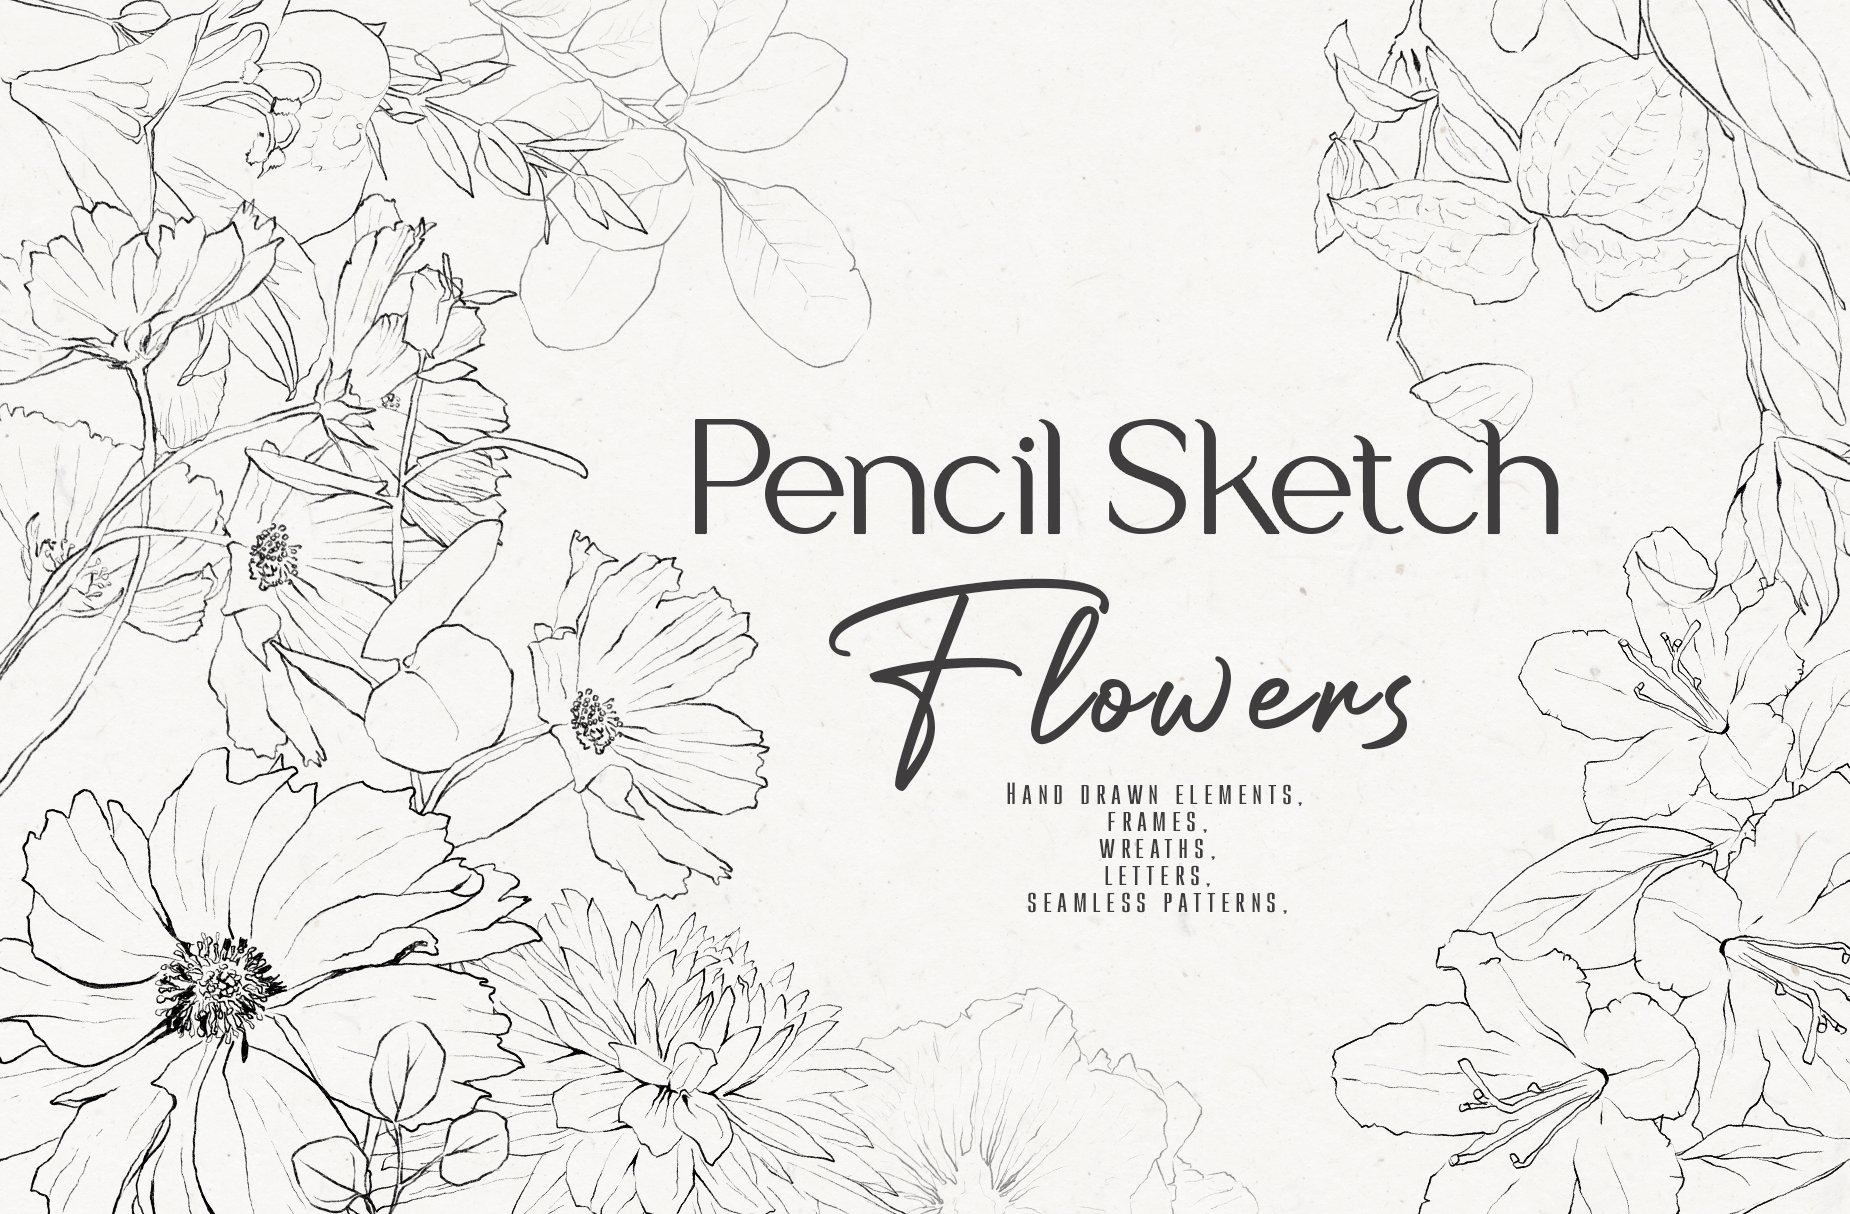 Pencil-drawn flowers cover image.